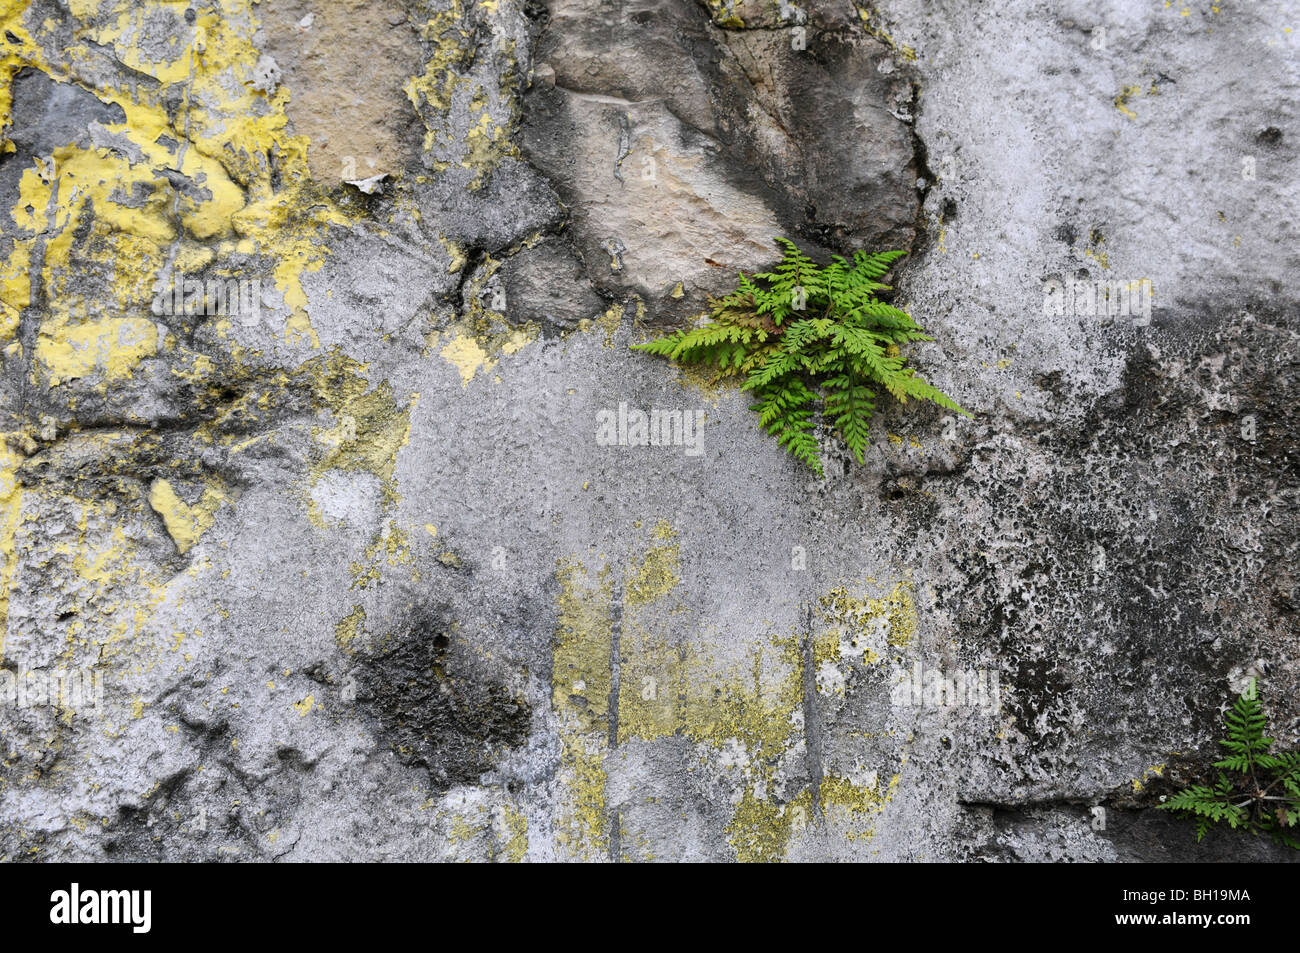 Grunge background wall with fern plants Stock Photo